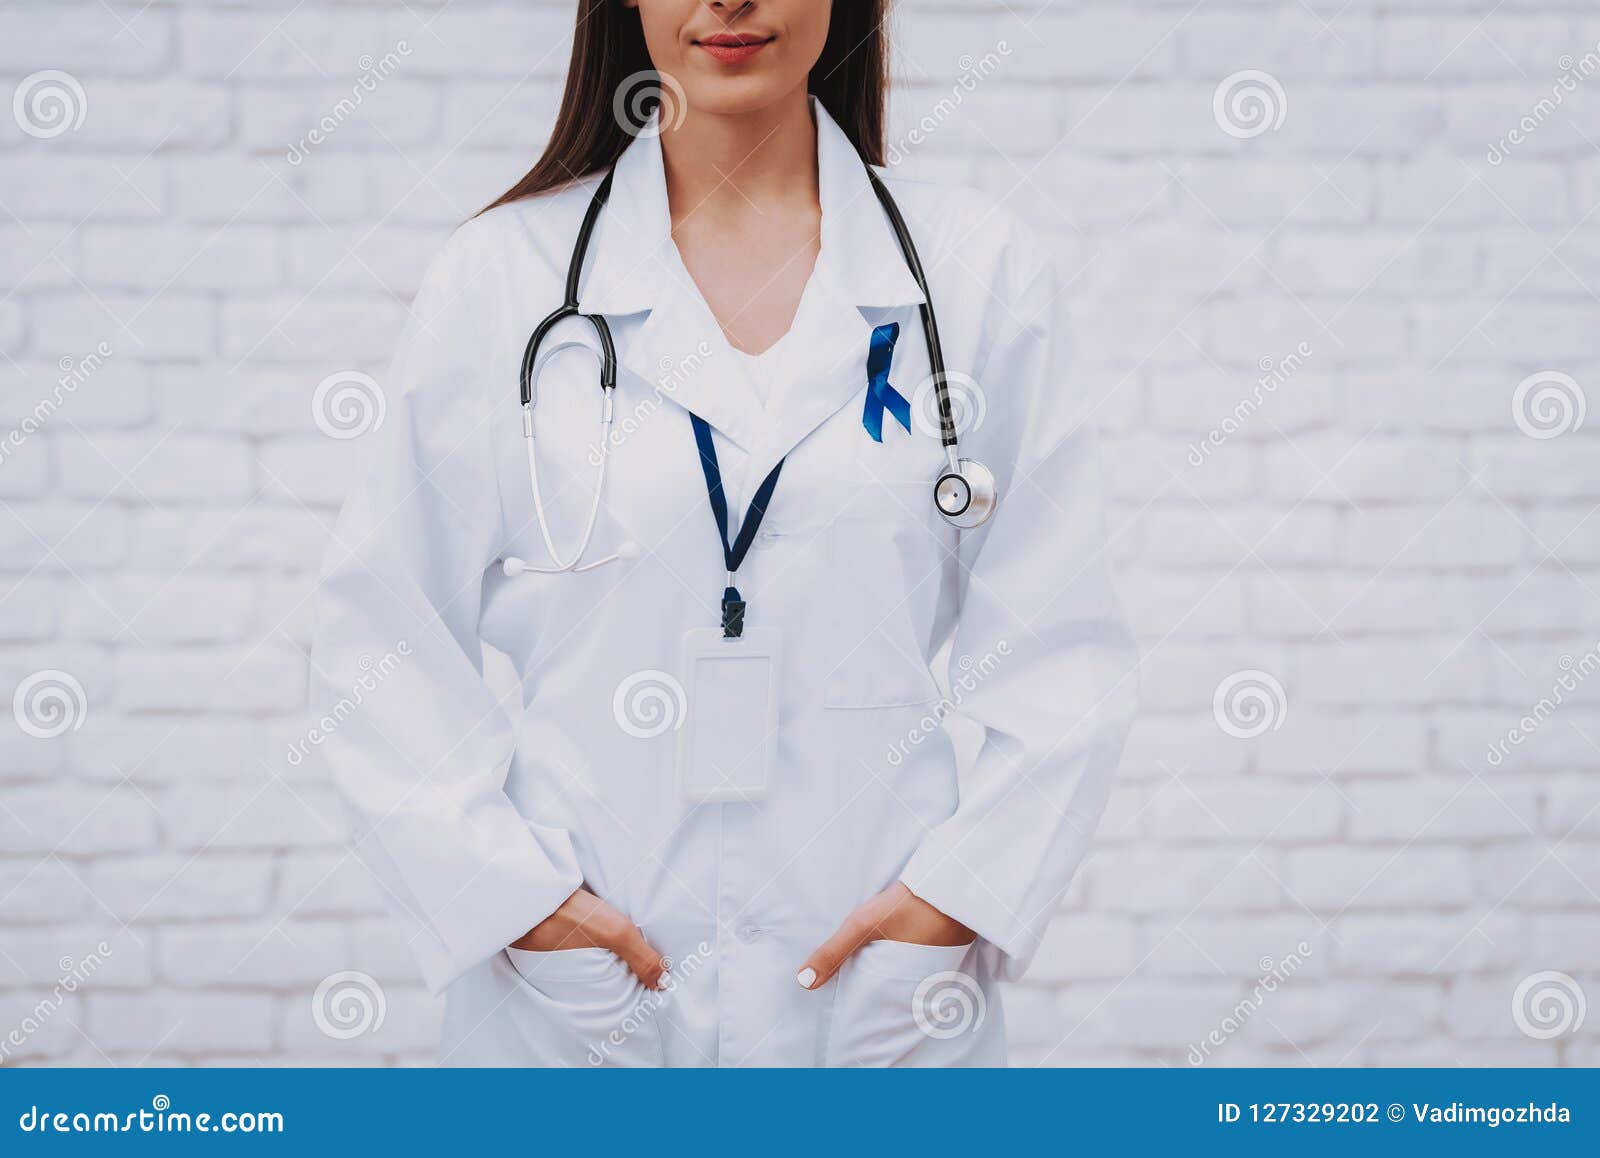 practitioner with stethoscope profession help.